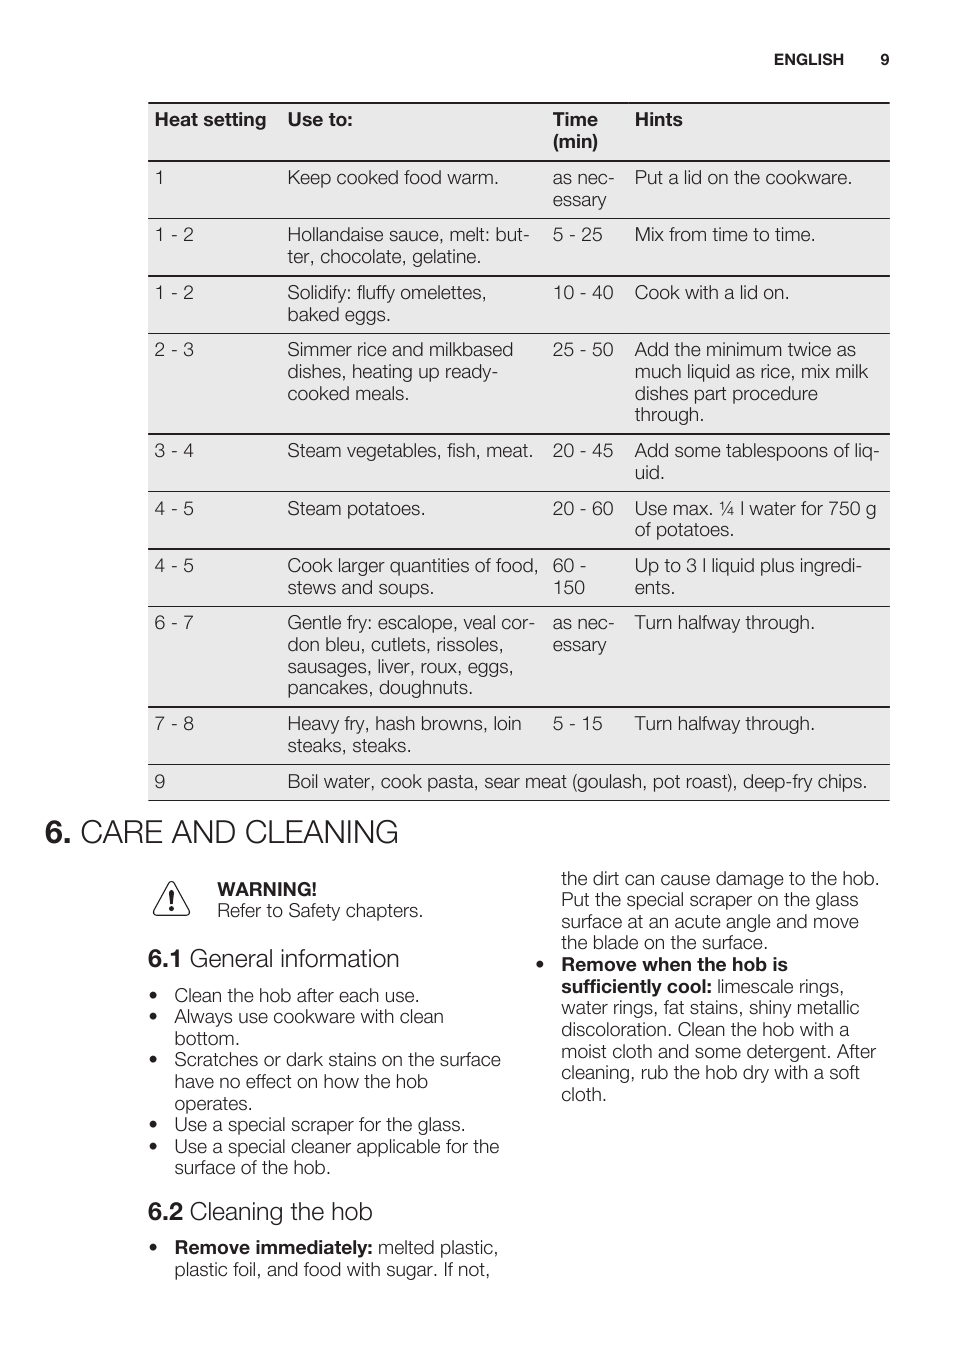 Care and cleaning, 1 general information, 2 cleaning the hob | Electrolux  EHF6232FOK User Manual | Page 9 / 56 | Original mode